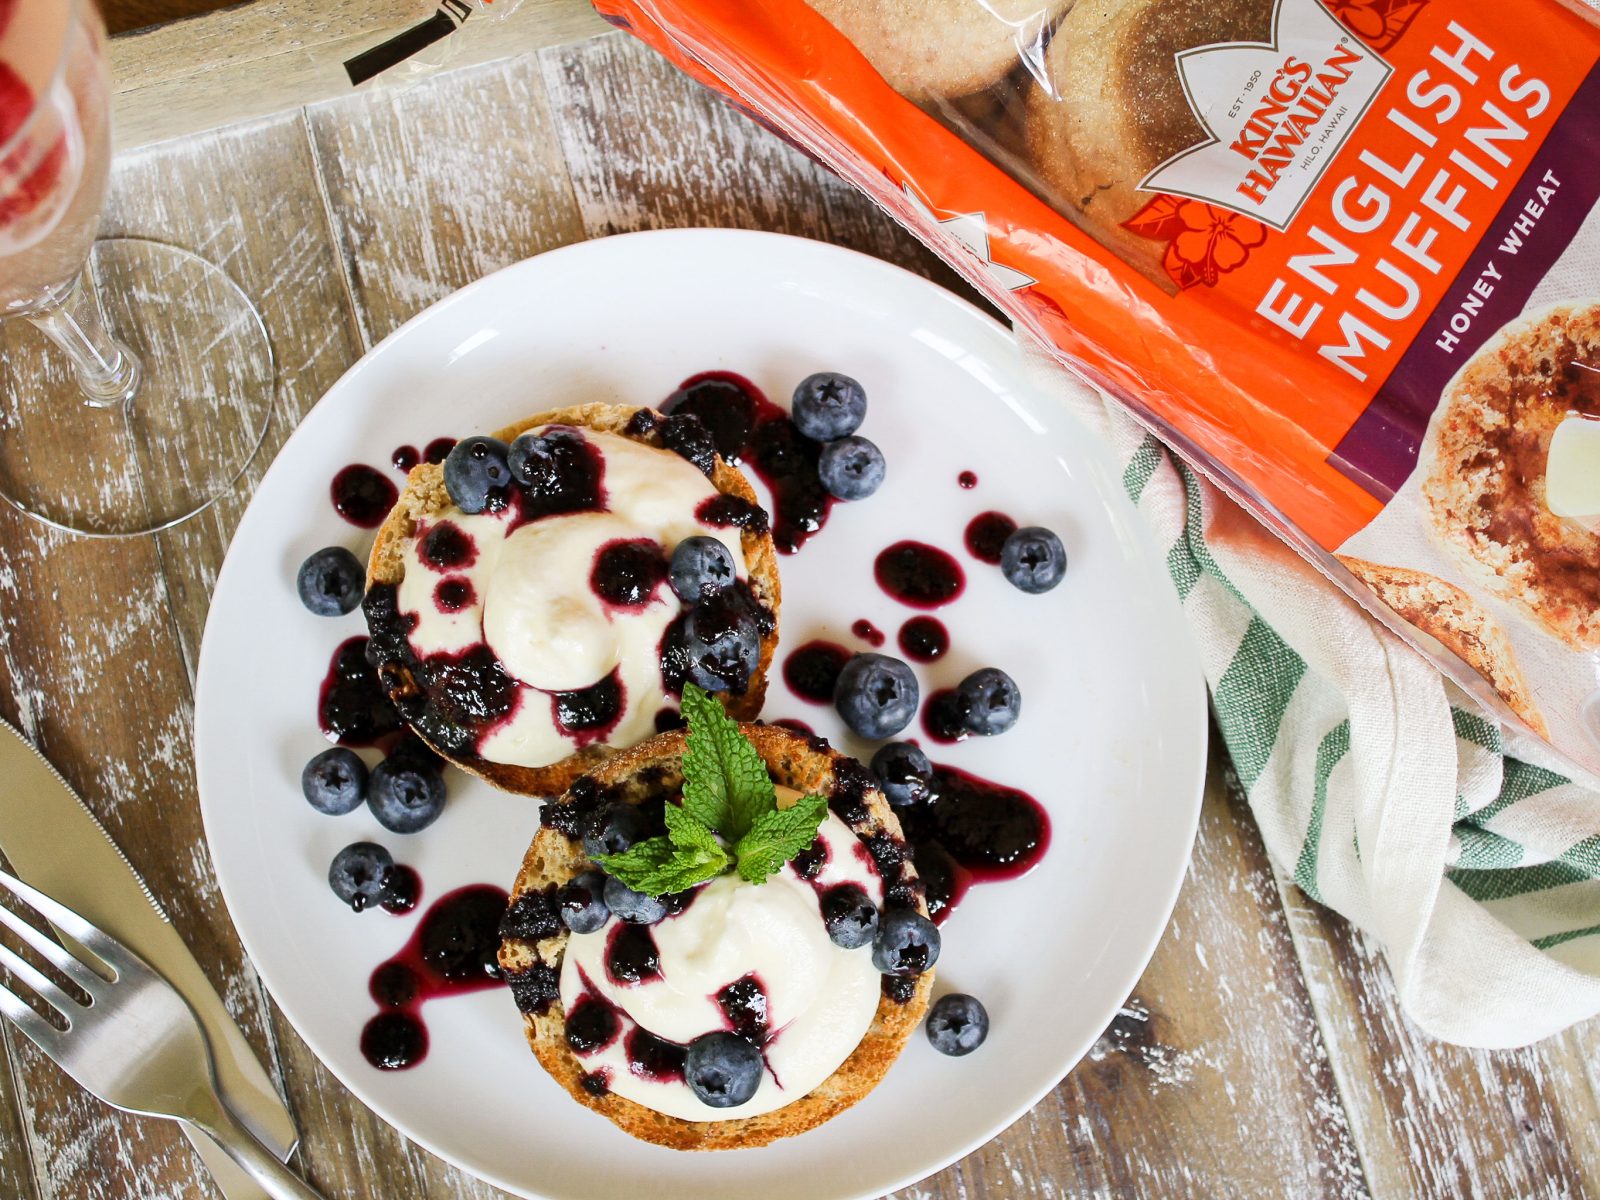 New King's Hawaiian English Muffins Are Available In Select Publix Location - Grab A Pack And Treat Mom To Great Taste on I Heart Publix